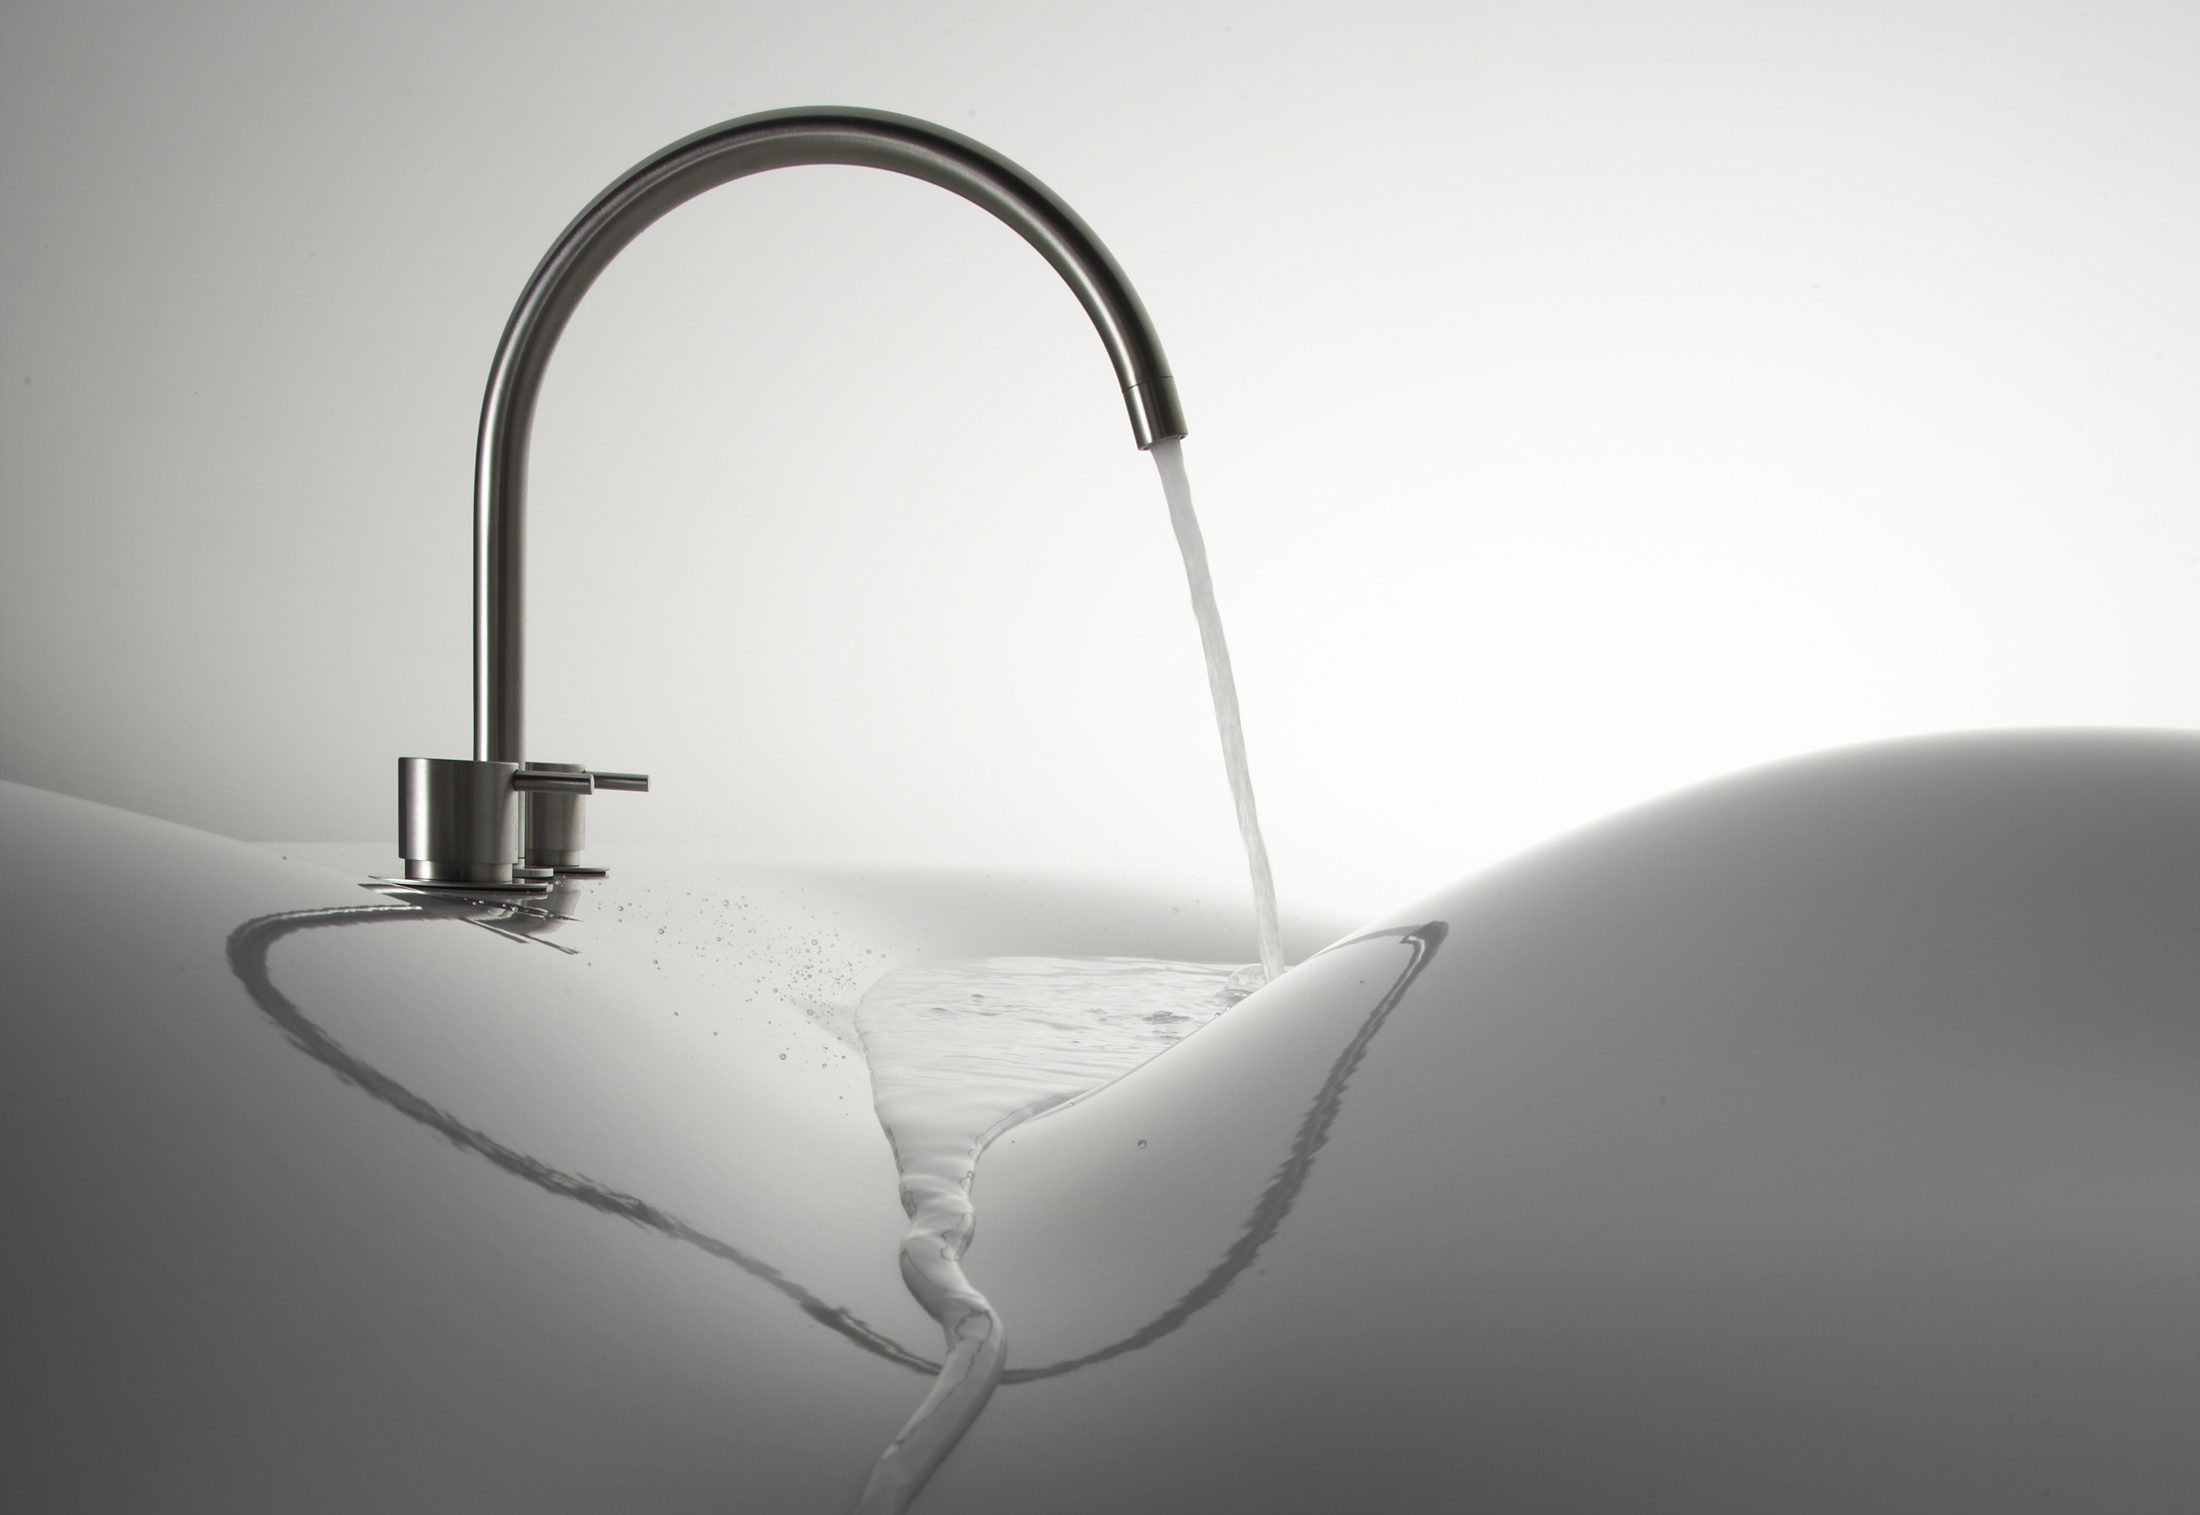 Read more about the article Kanera Sinks: Like Having A Little Lake In Your Home